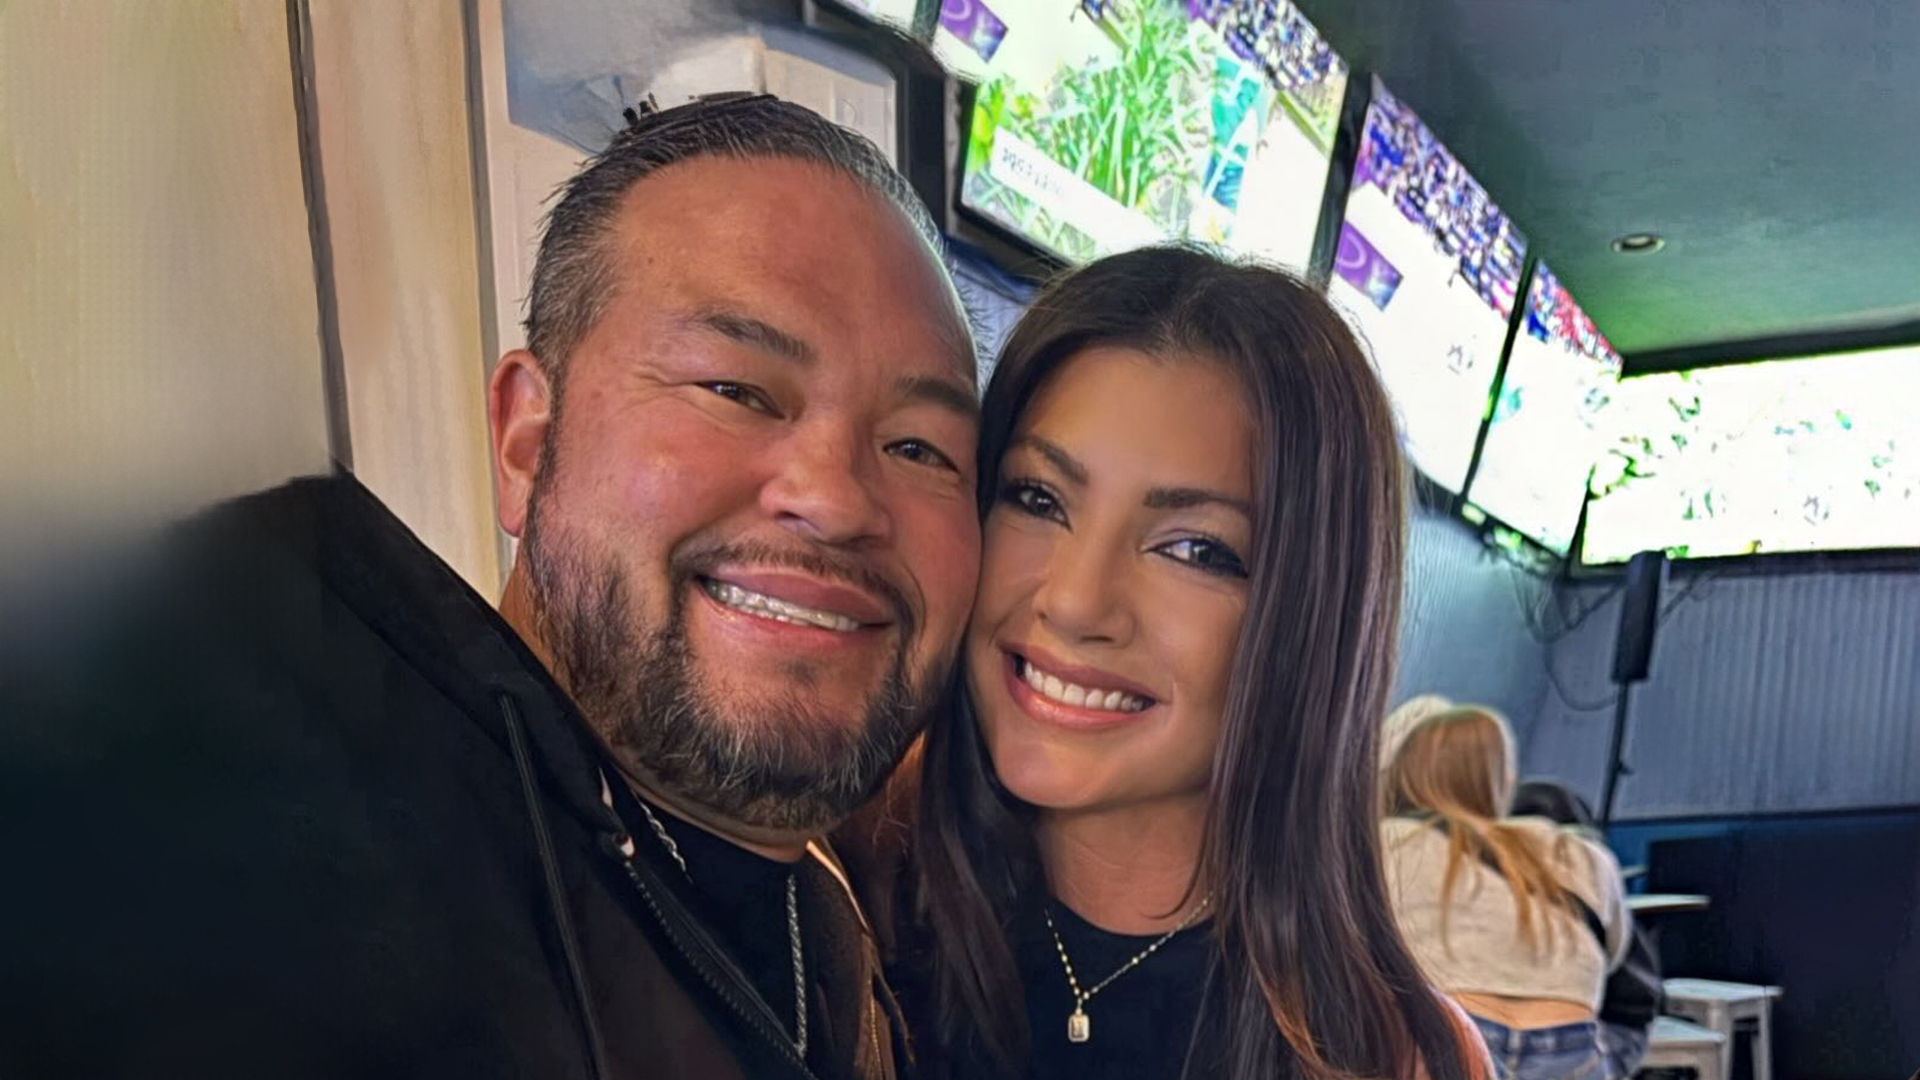 Jon Gosselin smiles with girlfriend Stephanie Lebo in rare photo of private couple just weeks after star slammed ex Kate